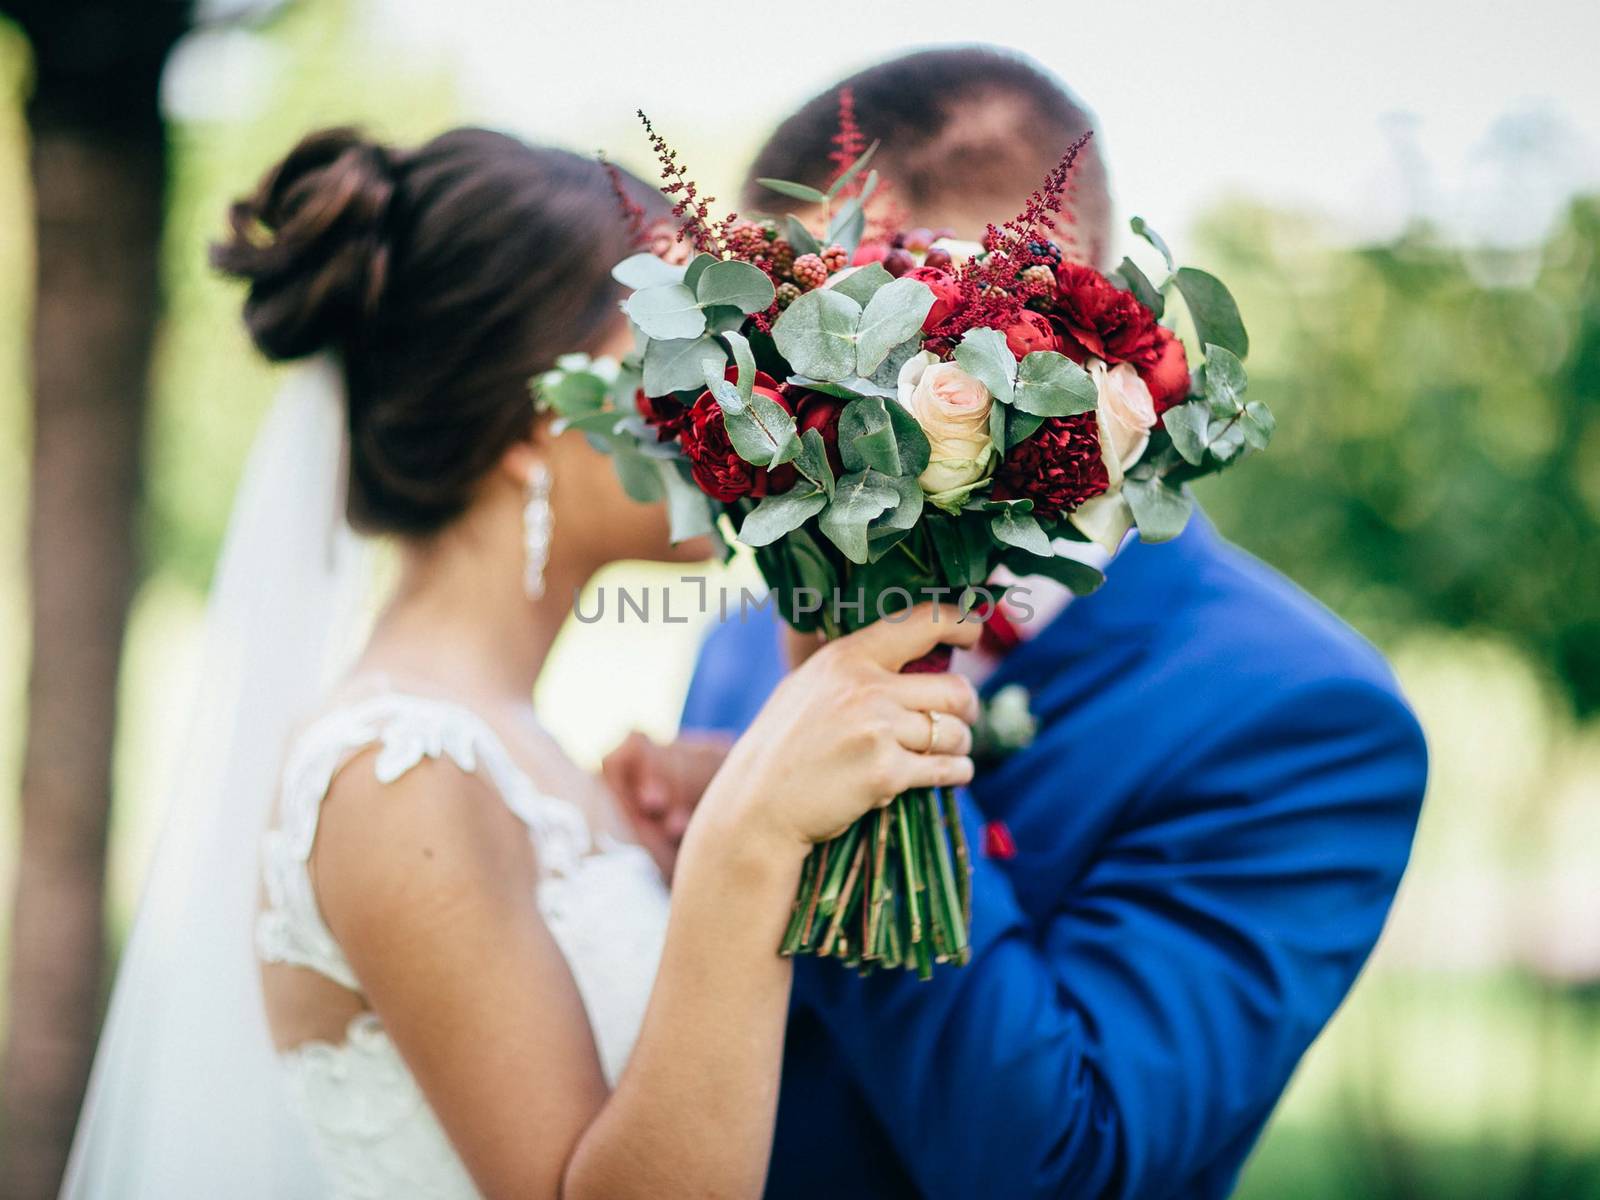 Bridal bouquet on the background of the groom with the bride. Br by Opikanets